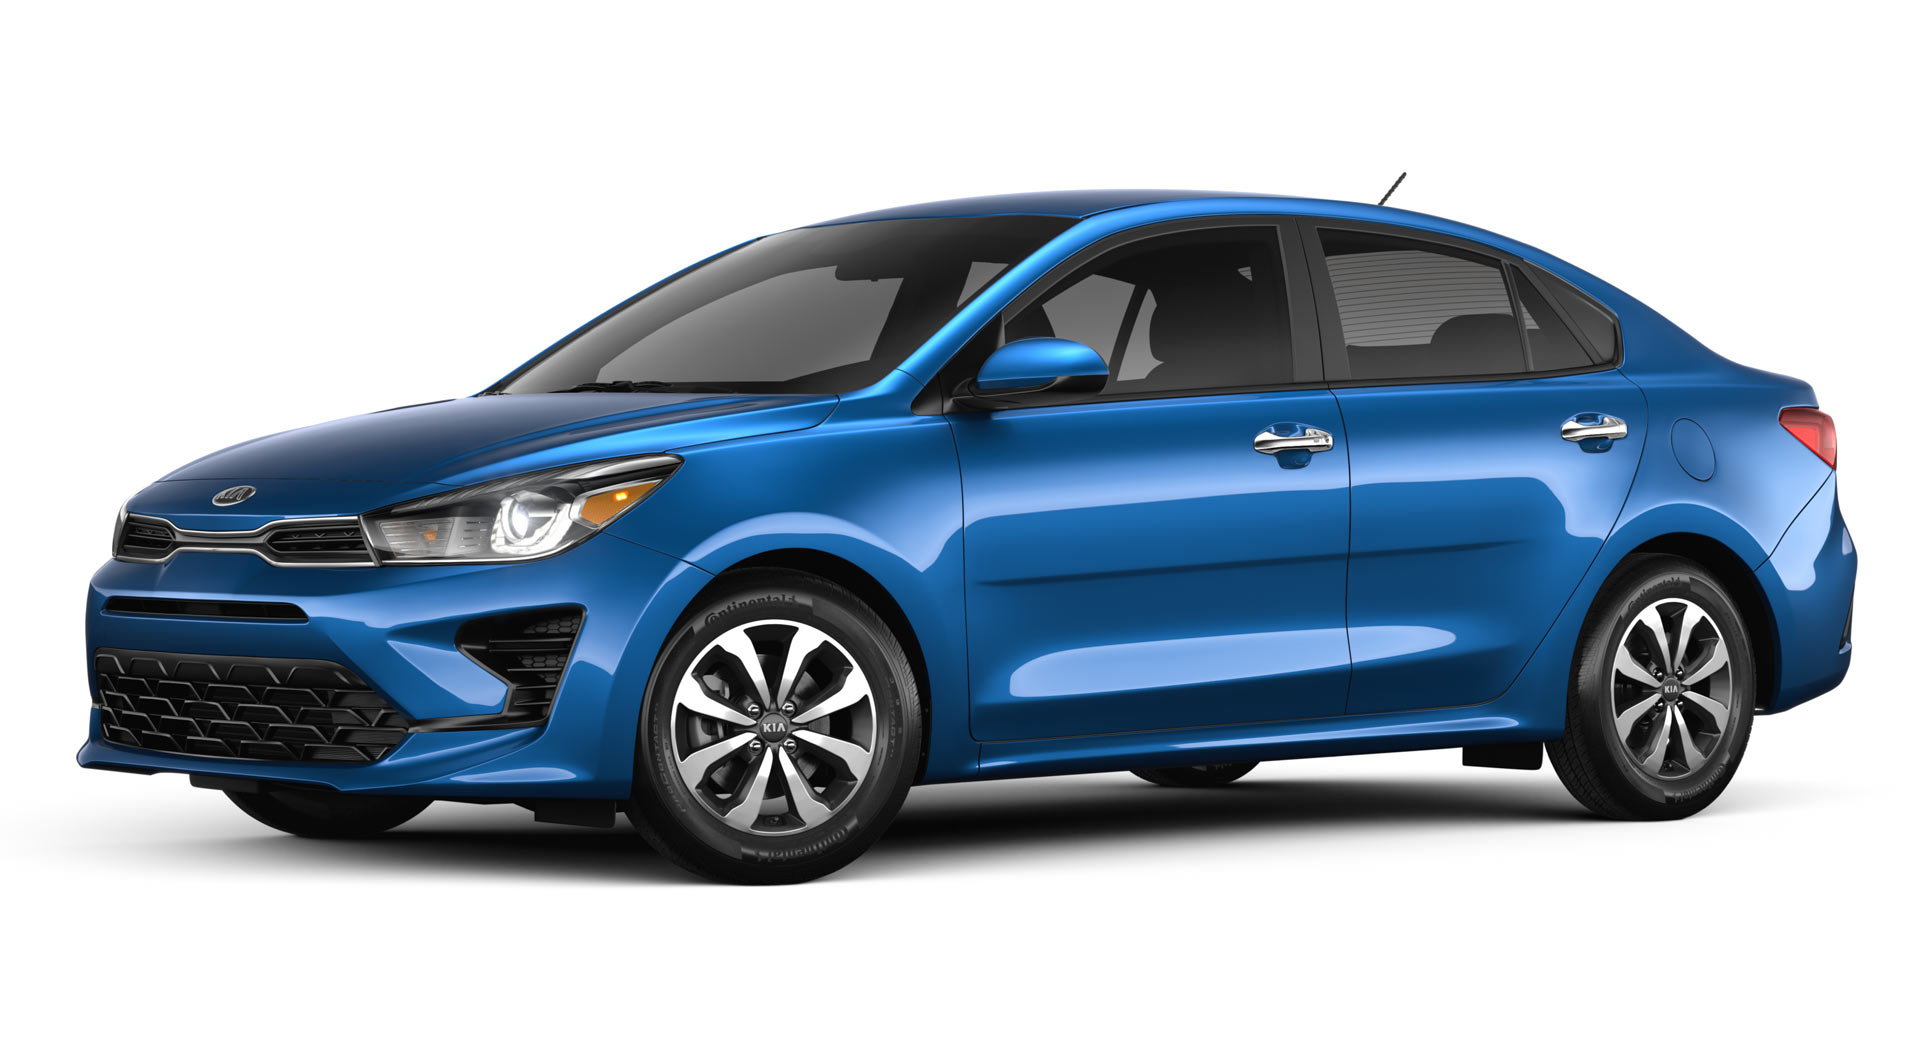 2021 Kia Rio Arrives In America With Updated Looks And New Tech ...